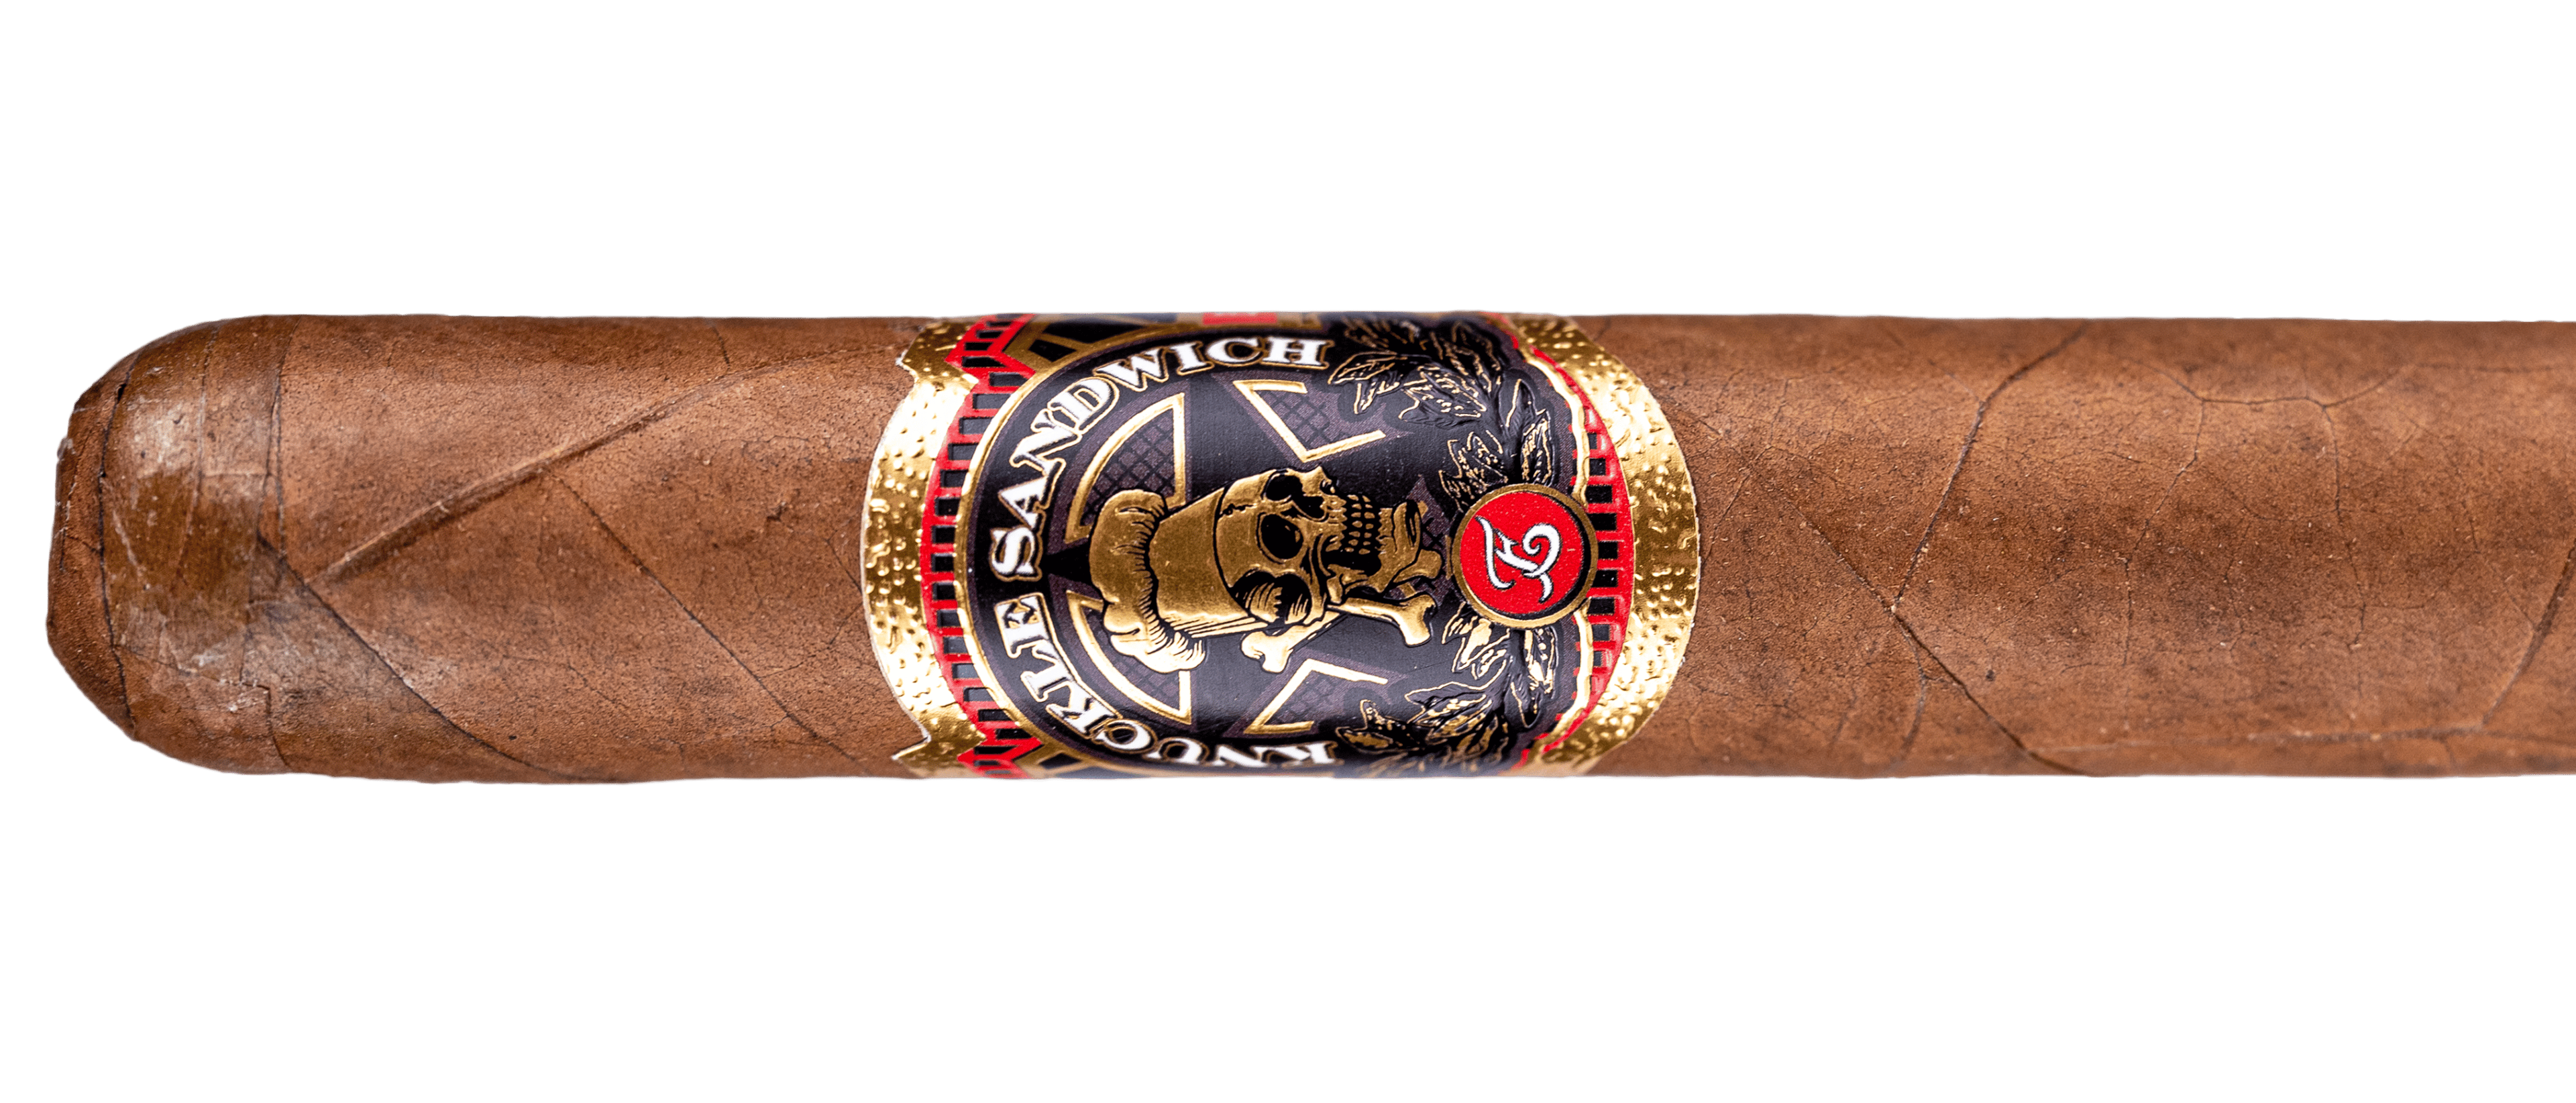 Espinosa Knuckle Sandwich Habano Toro H - Blind Cigar Review